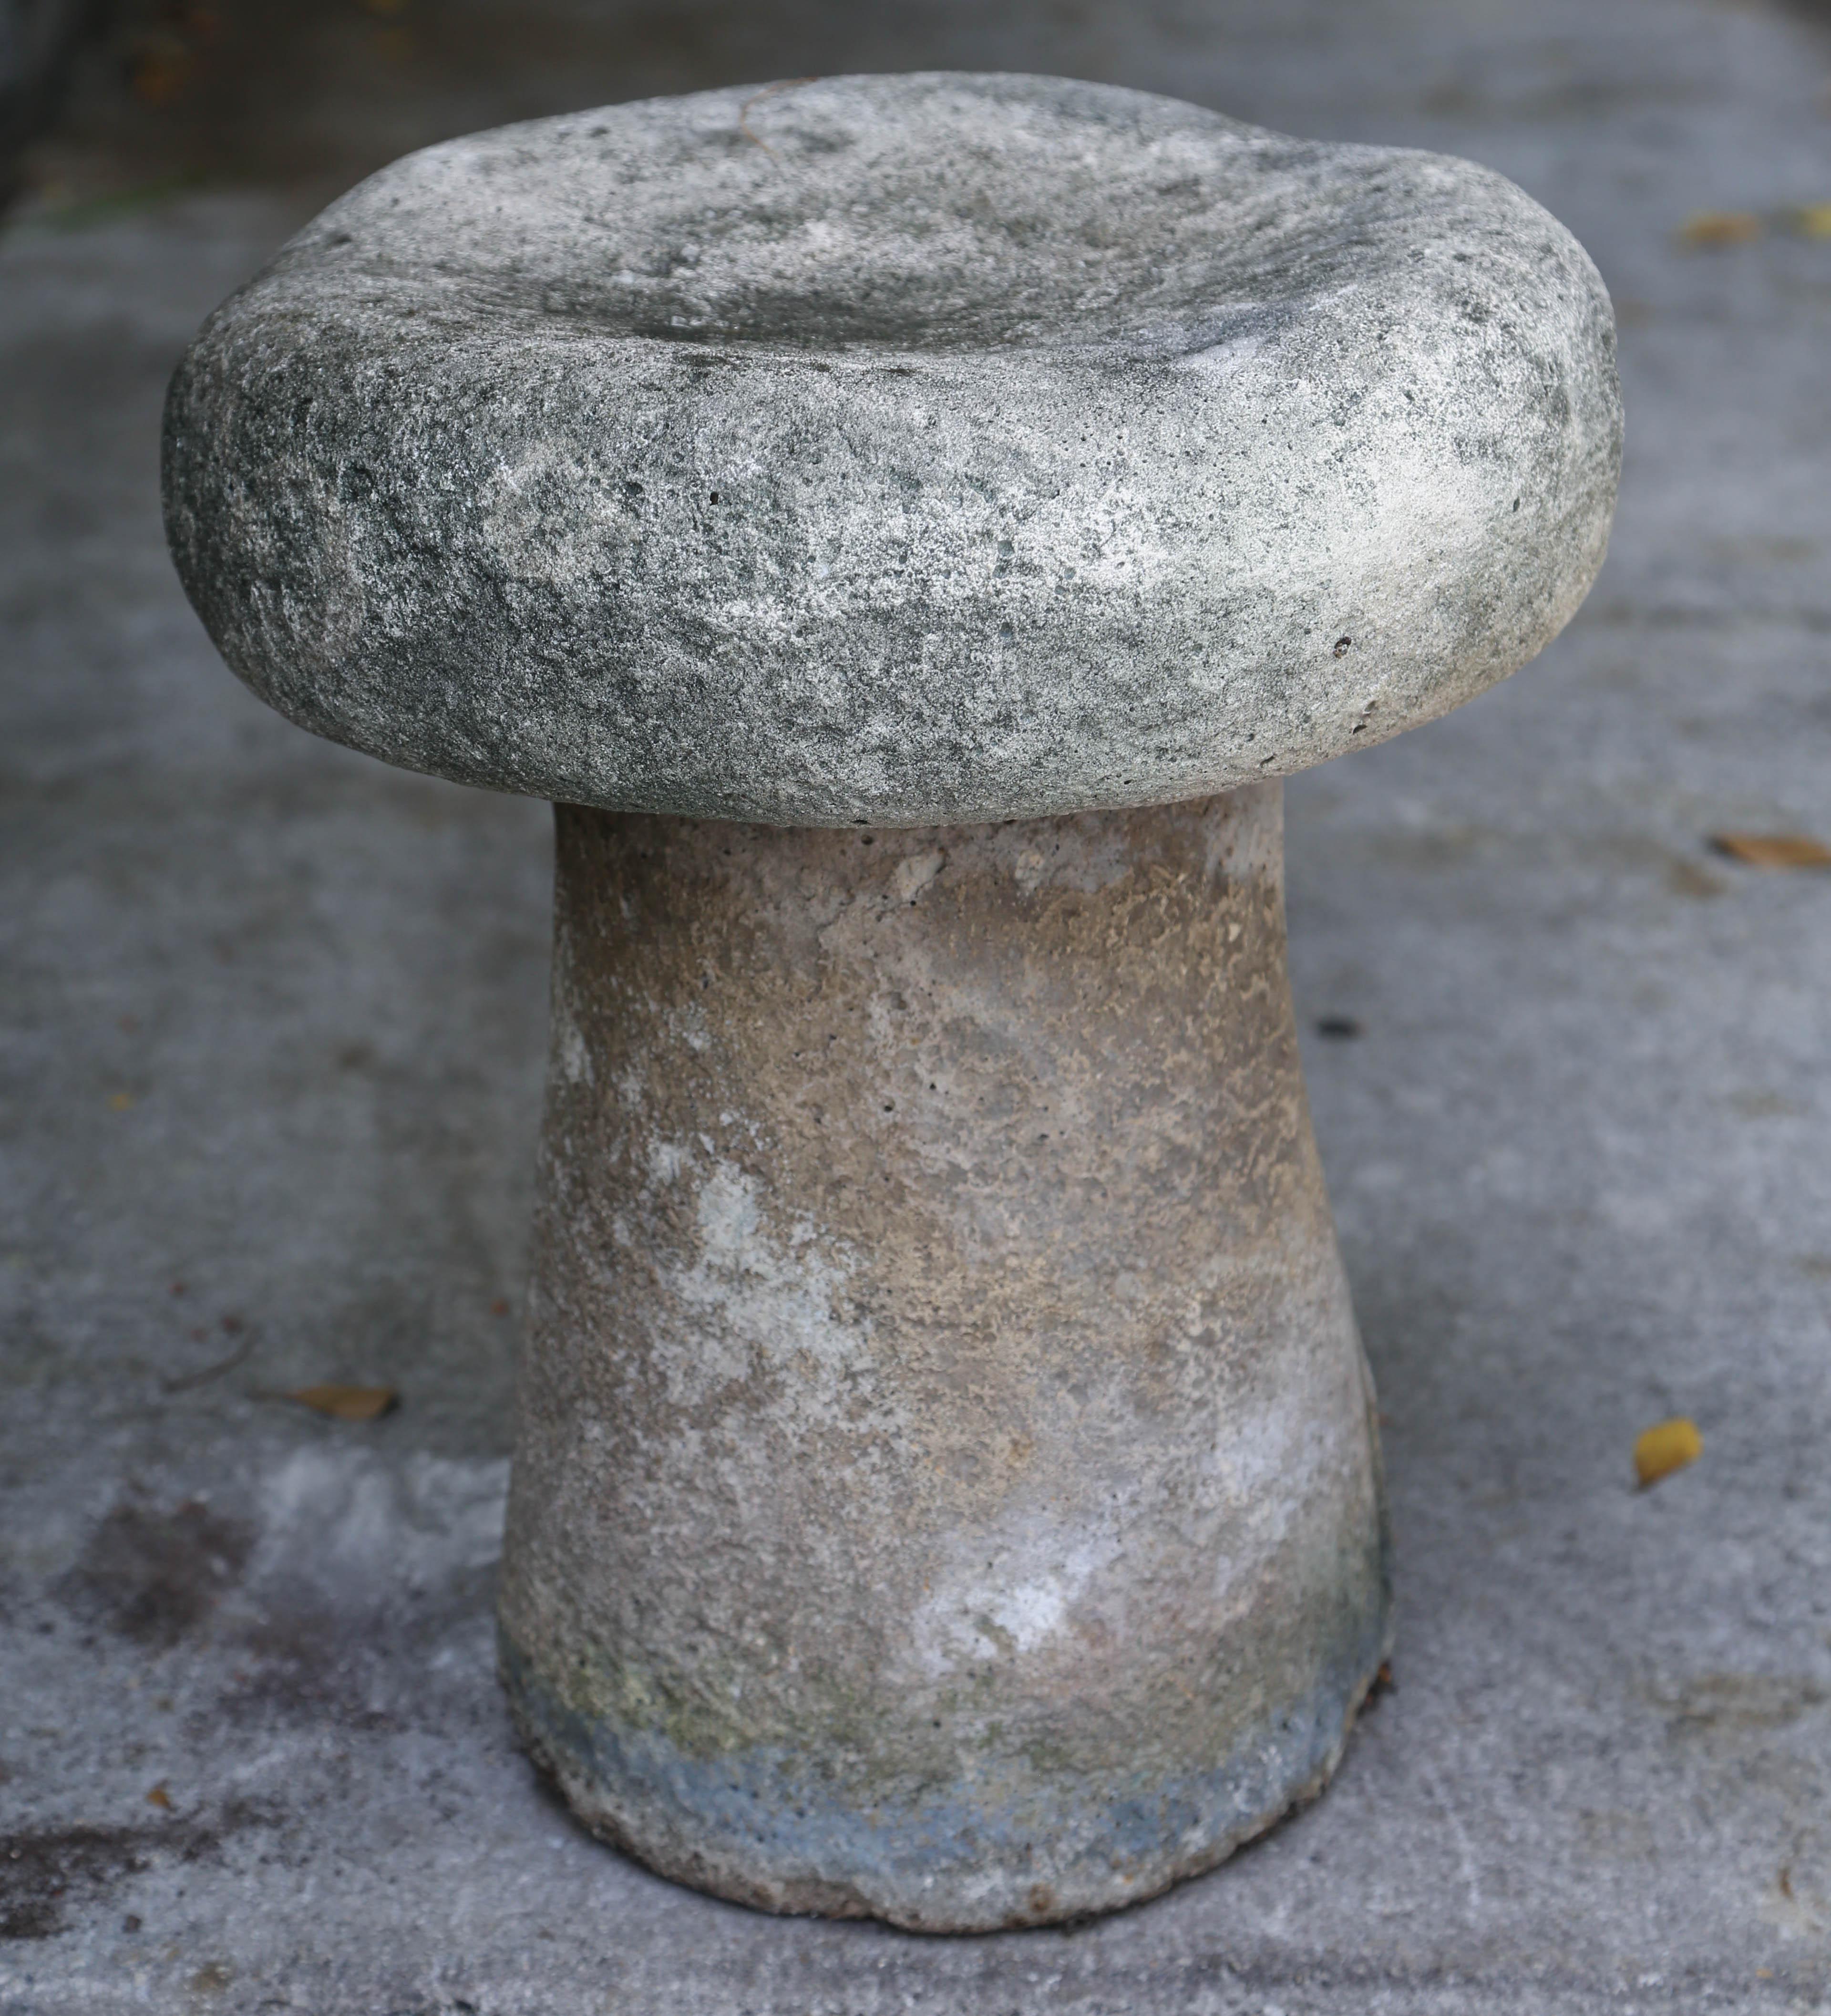 Vintage one piece stone garden seat in the shape of a mushroom.